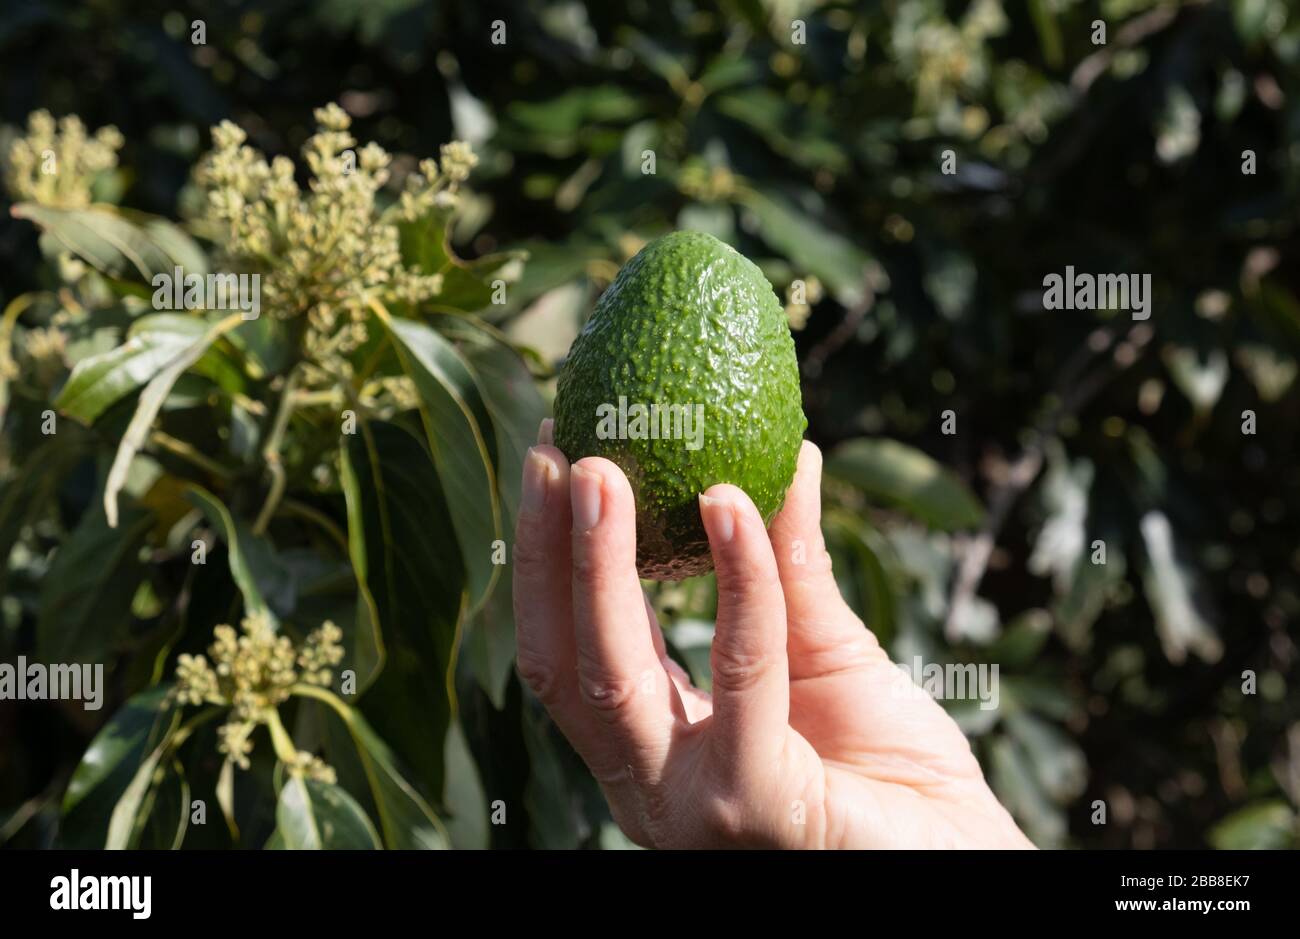 Man holding single avocado in hand with avocado tree in background Stock Photo